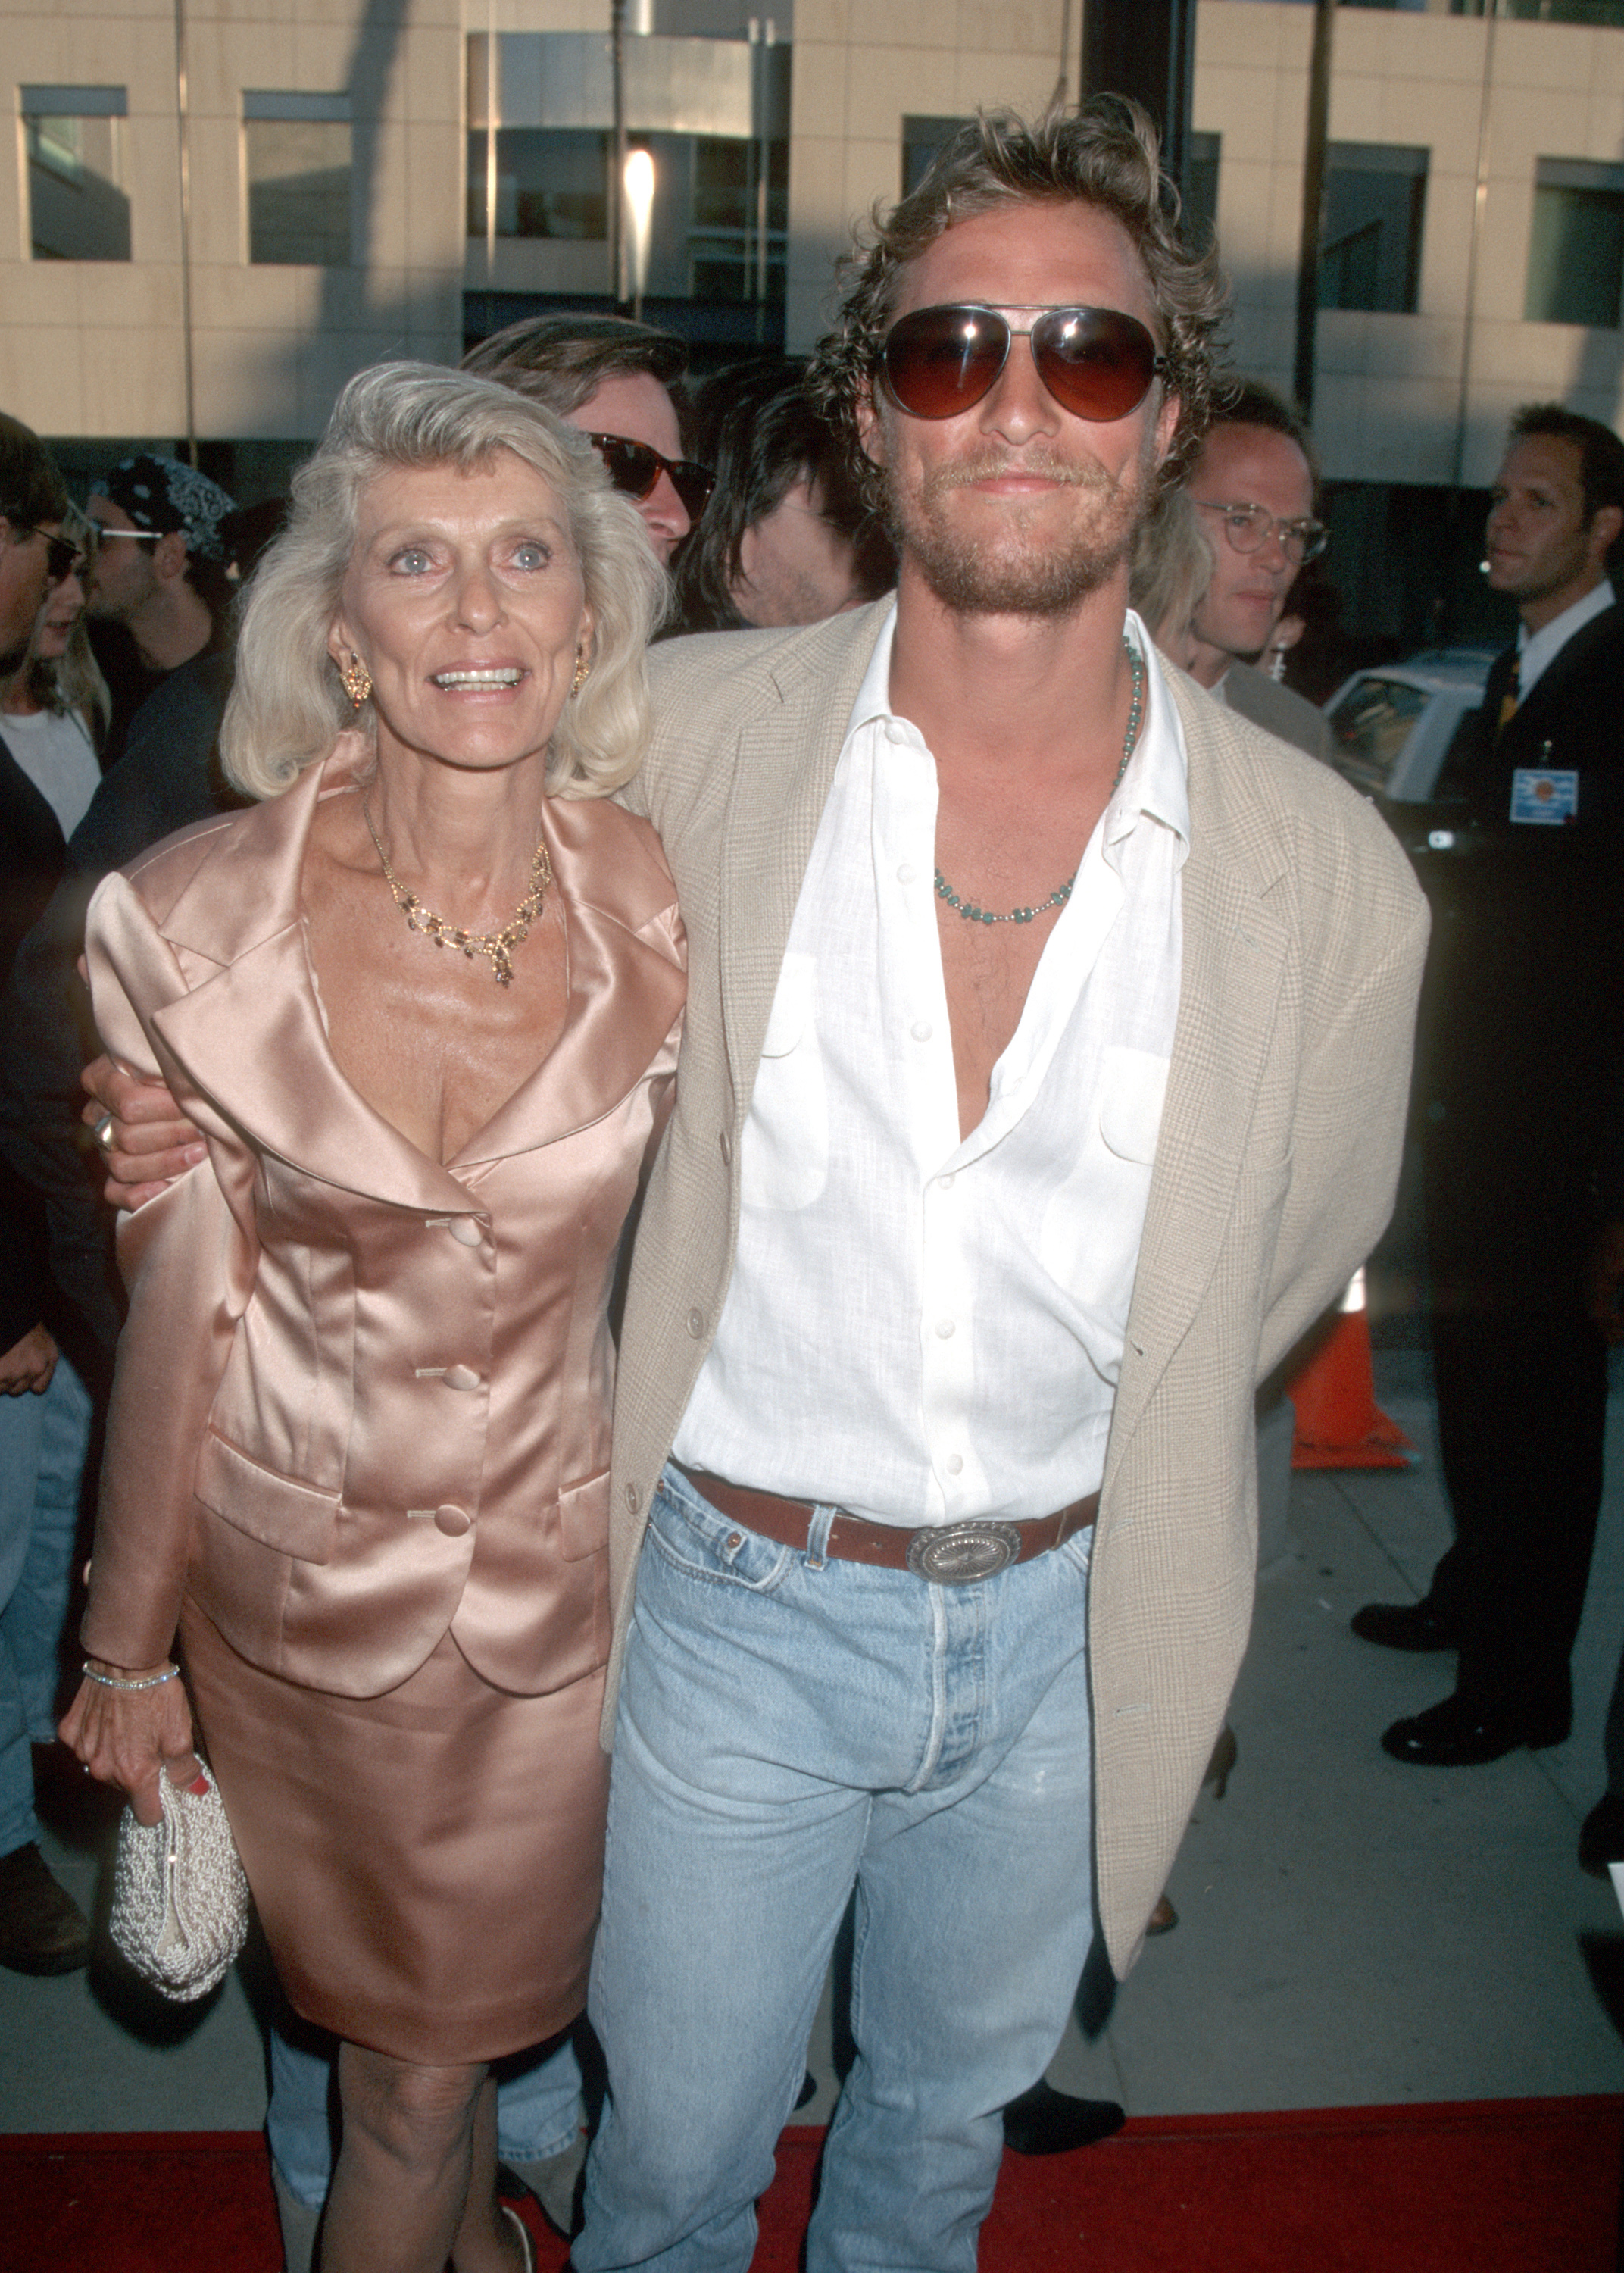 Kay and Matthew McConaughey at the premiere of "A Time to Kill" in Beverly Hills, California on July 9, 1996 | Source: Getty Images